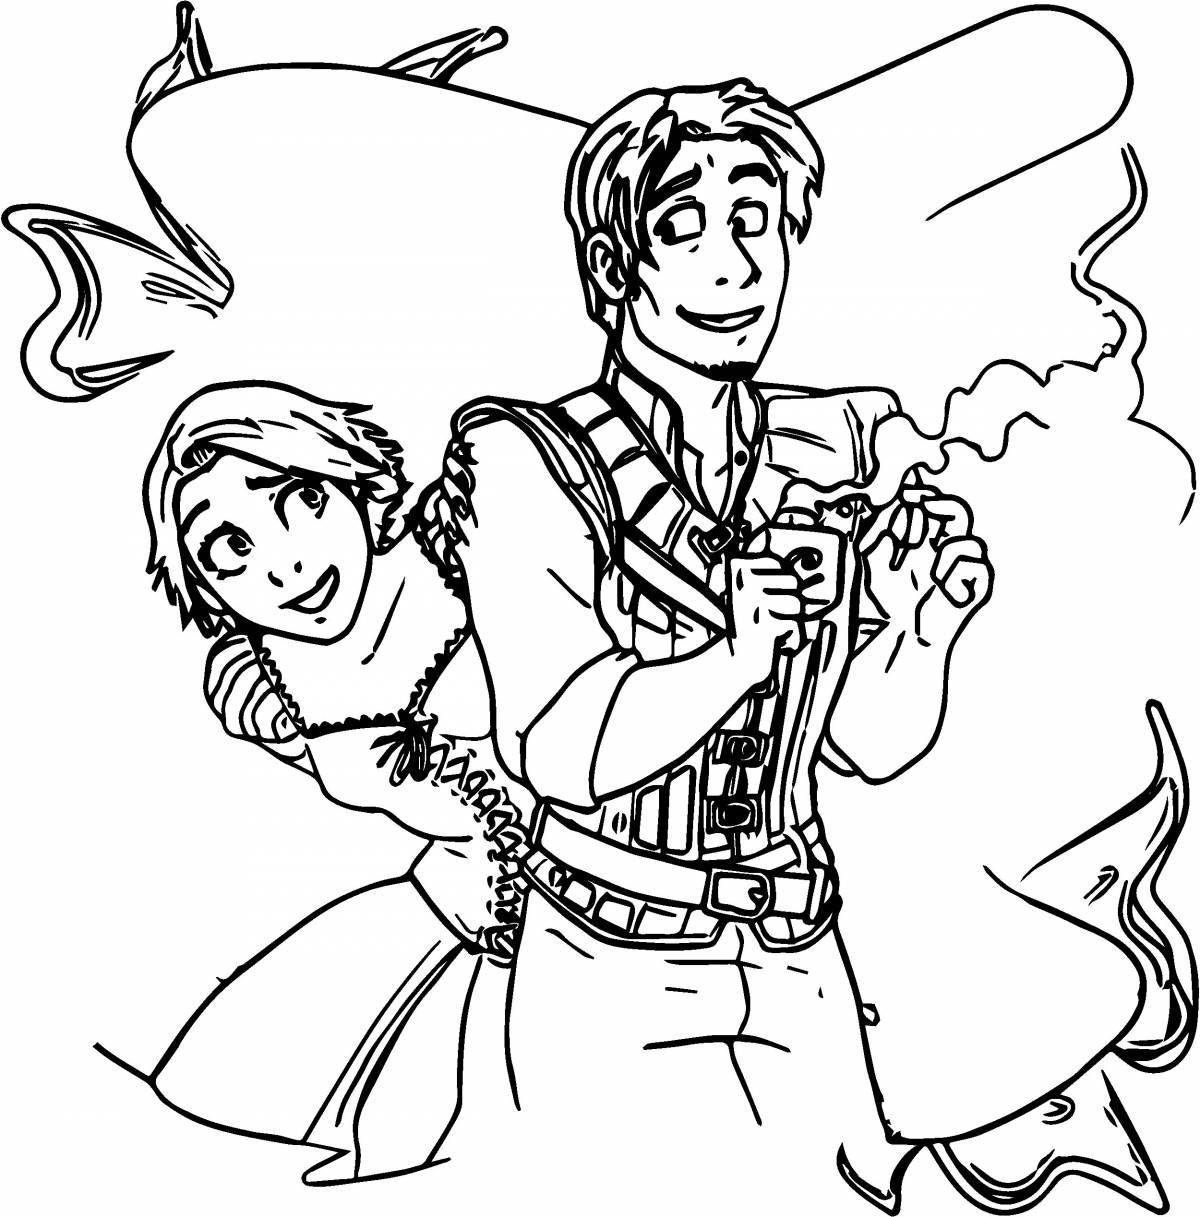 Tangled and Eugene funny coloring book